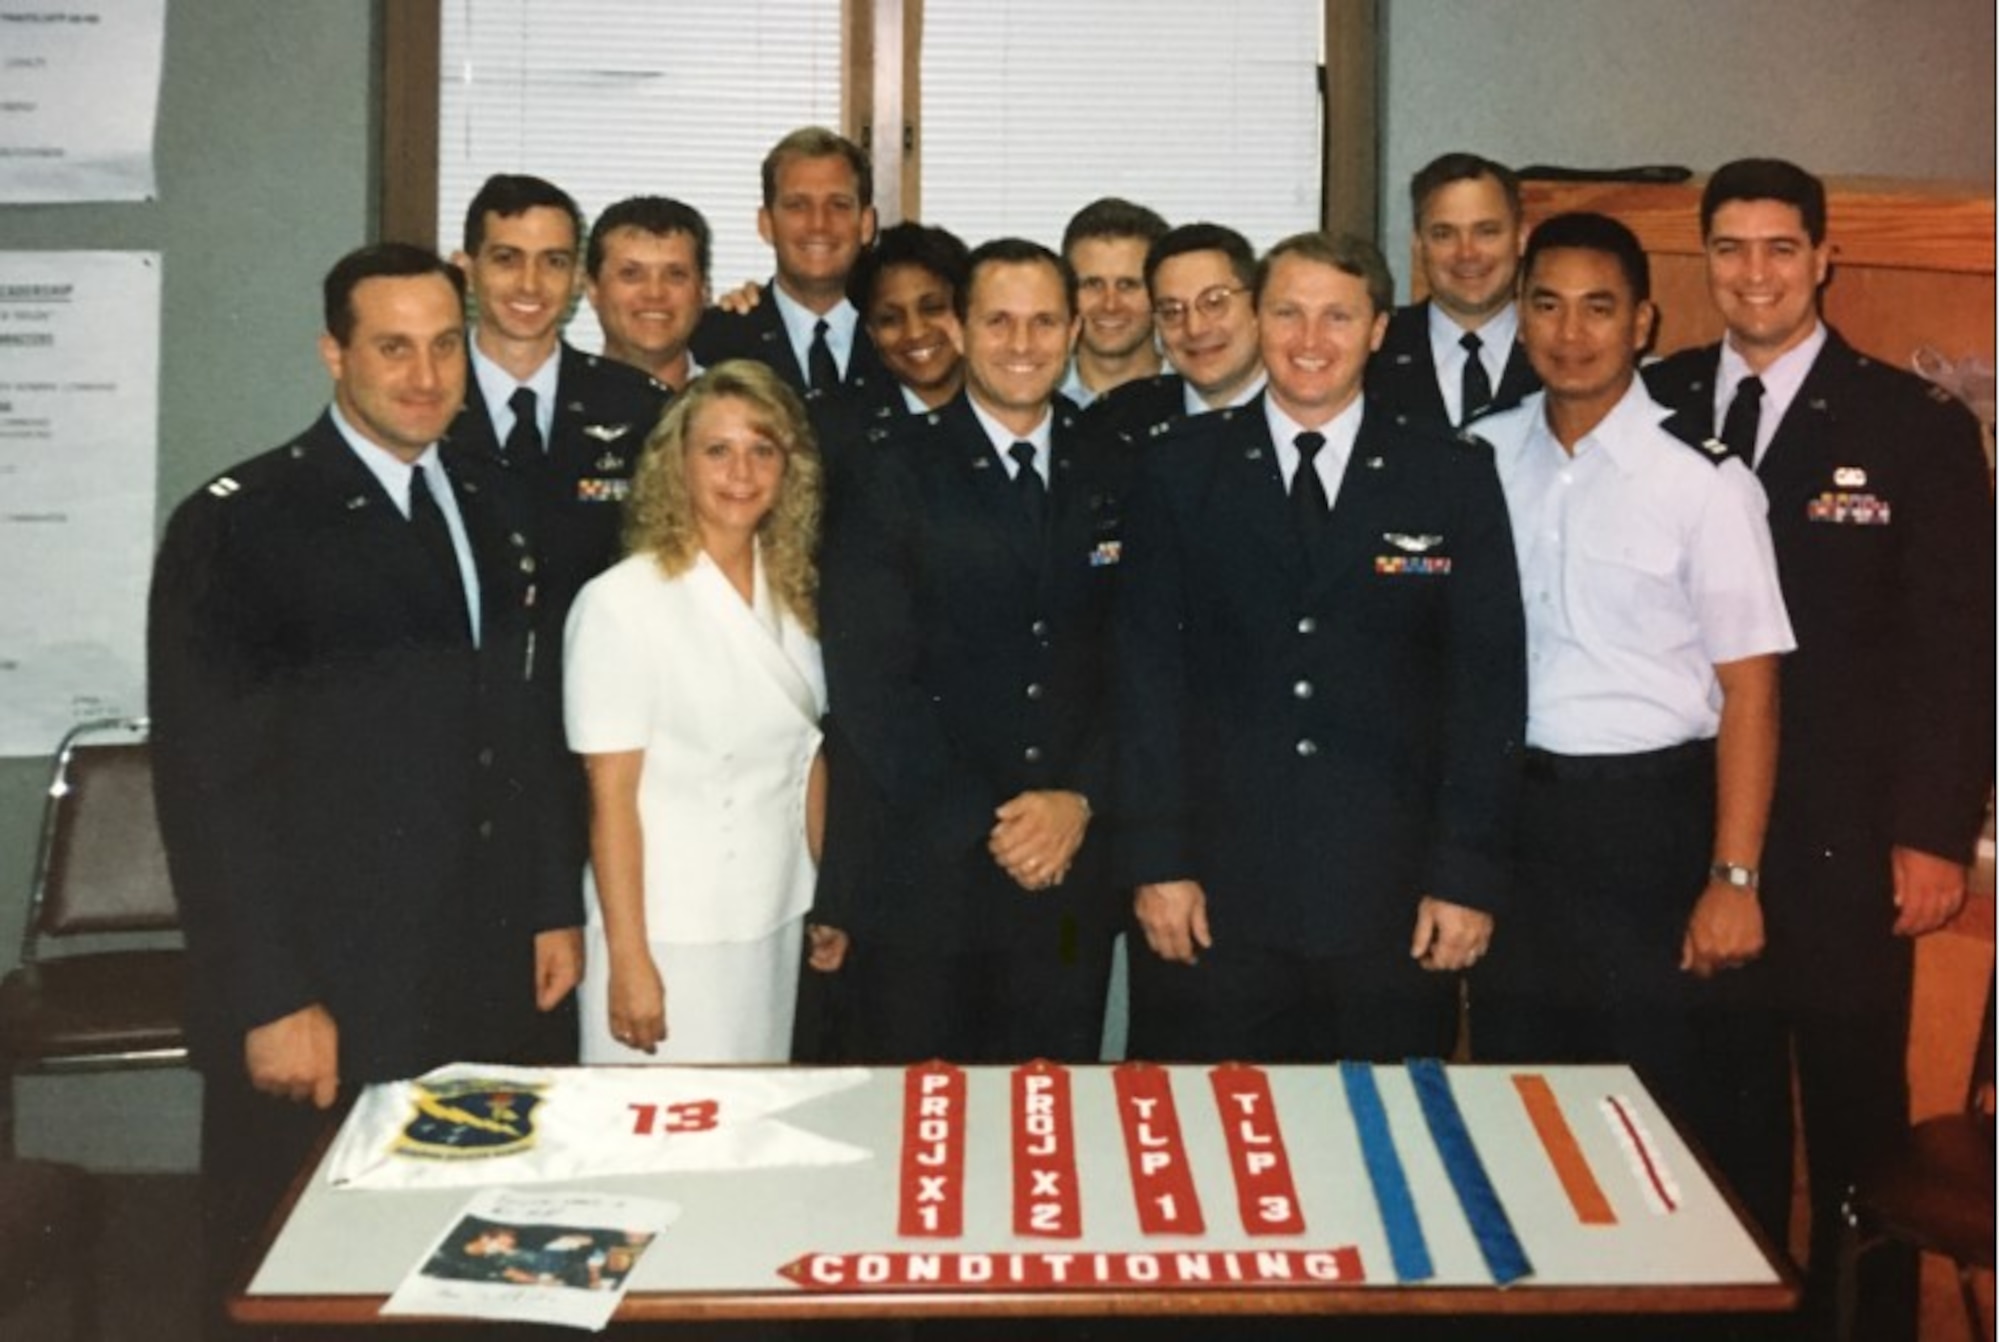 Tammy Jetton was one of nine civilian woman selected for Squadron Officer School out of 685 students in 1999.